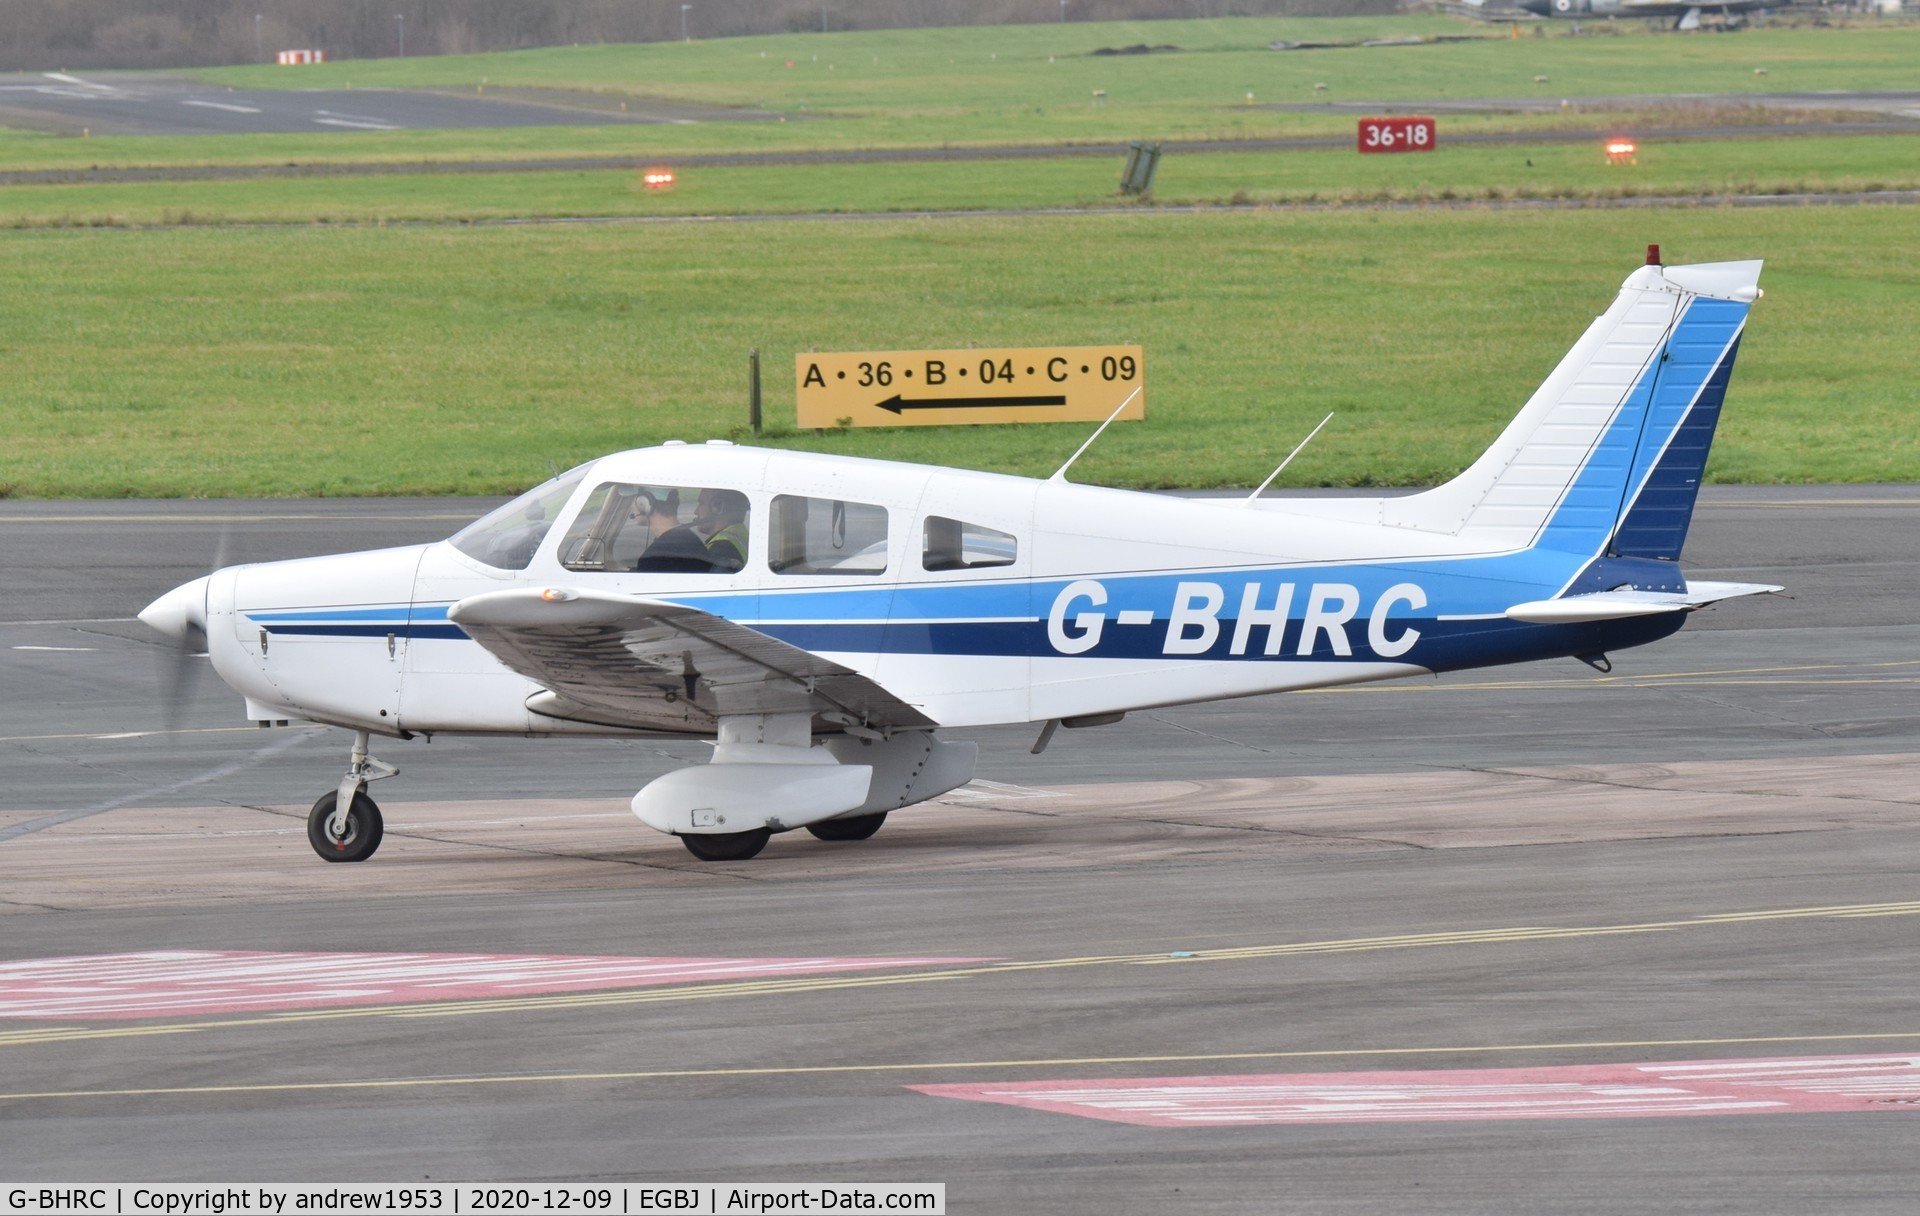 G-BHRC, 1979 Piper PA-28-161 Cherokee Warrior II C/N 28-7916430, G-BHRC at Gloucestershire Airport.